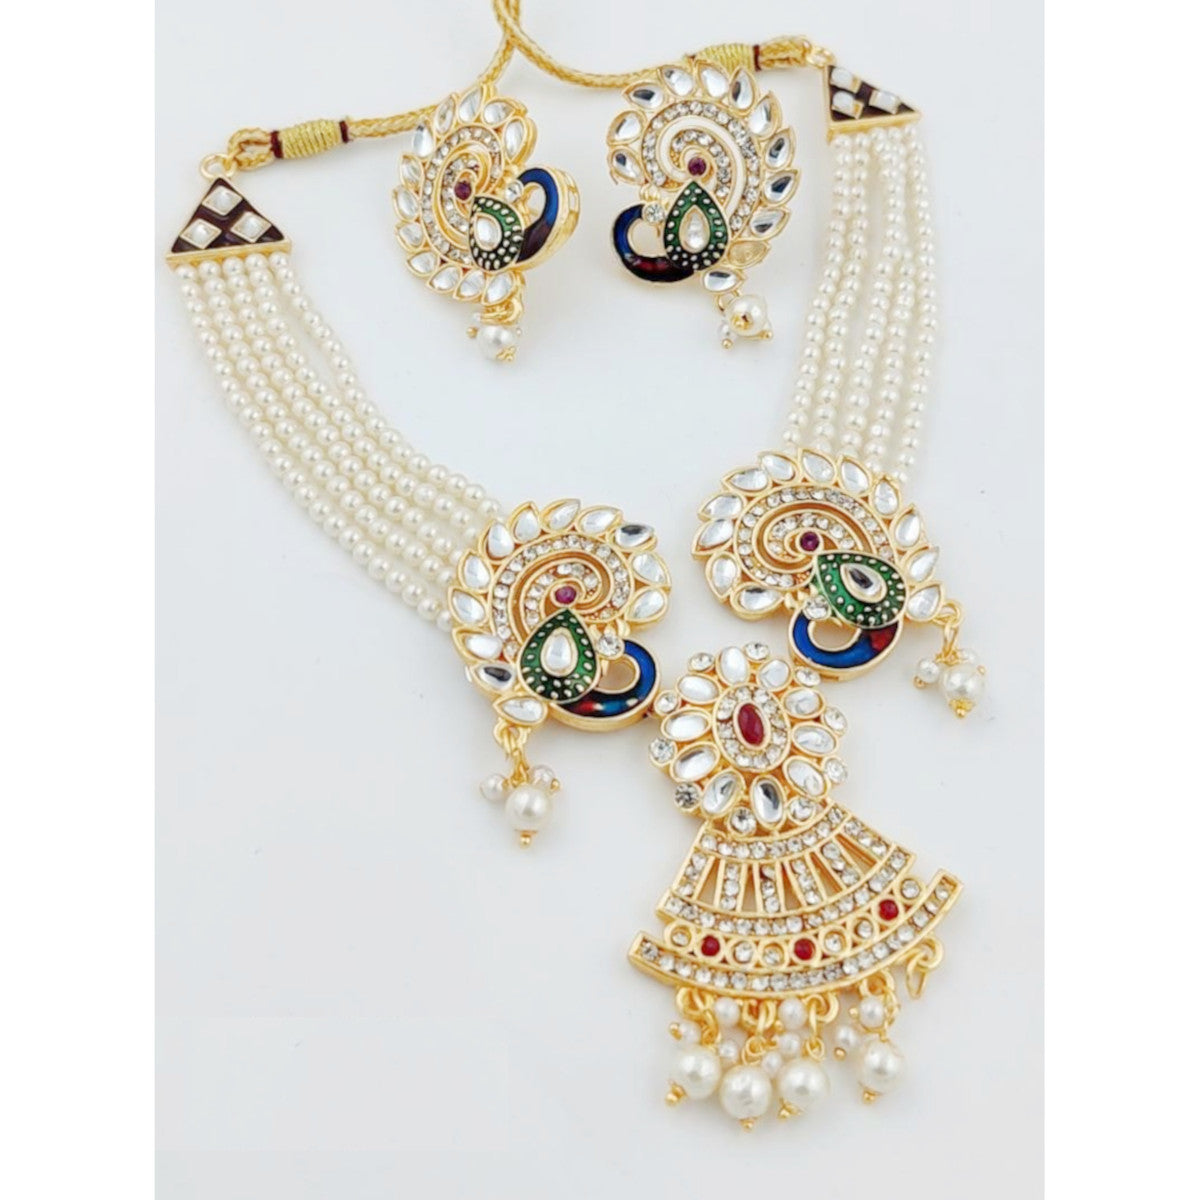 Peacock Best Traditional Designed by Handcrafted Necklace with Earrings for Women | Buy This Necklace Online from Mekkna